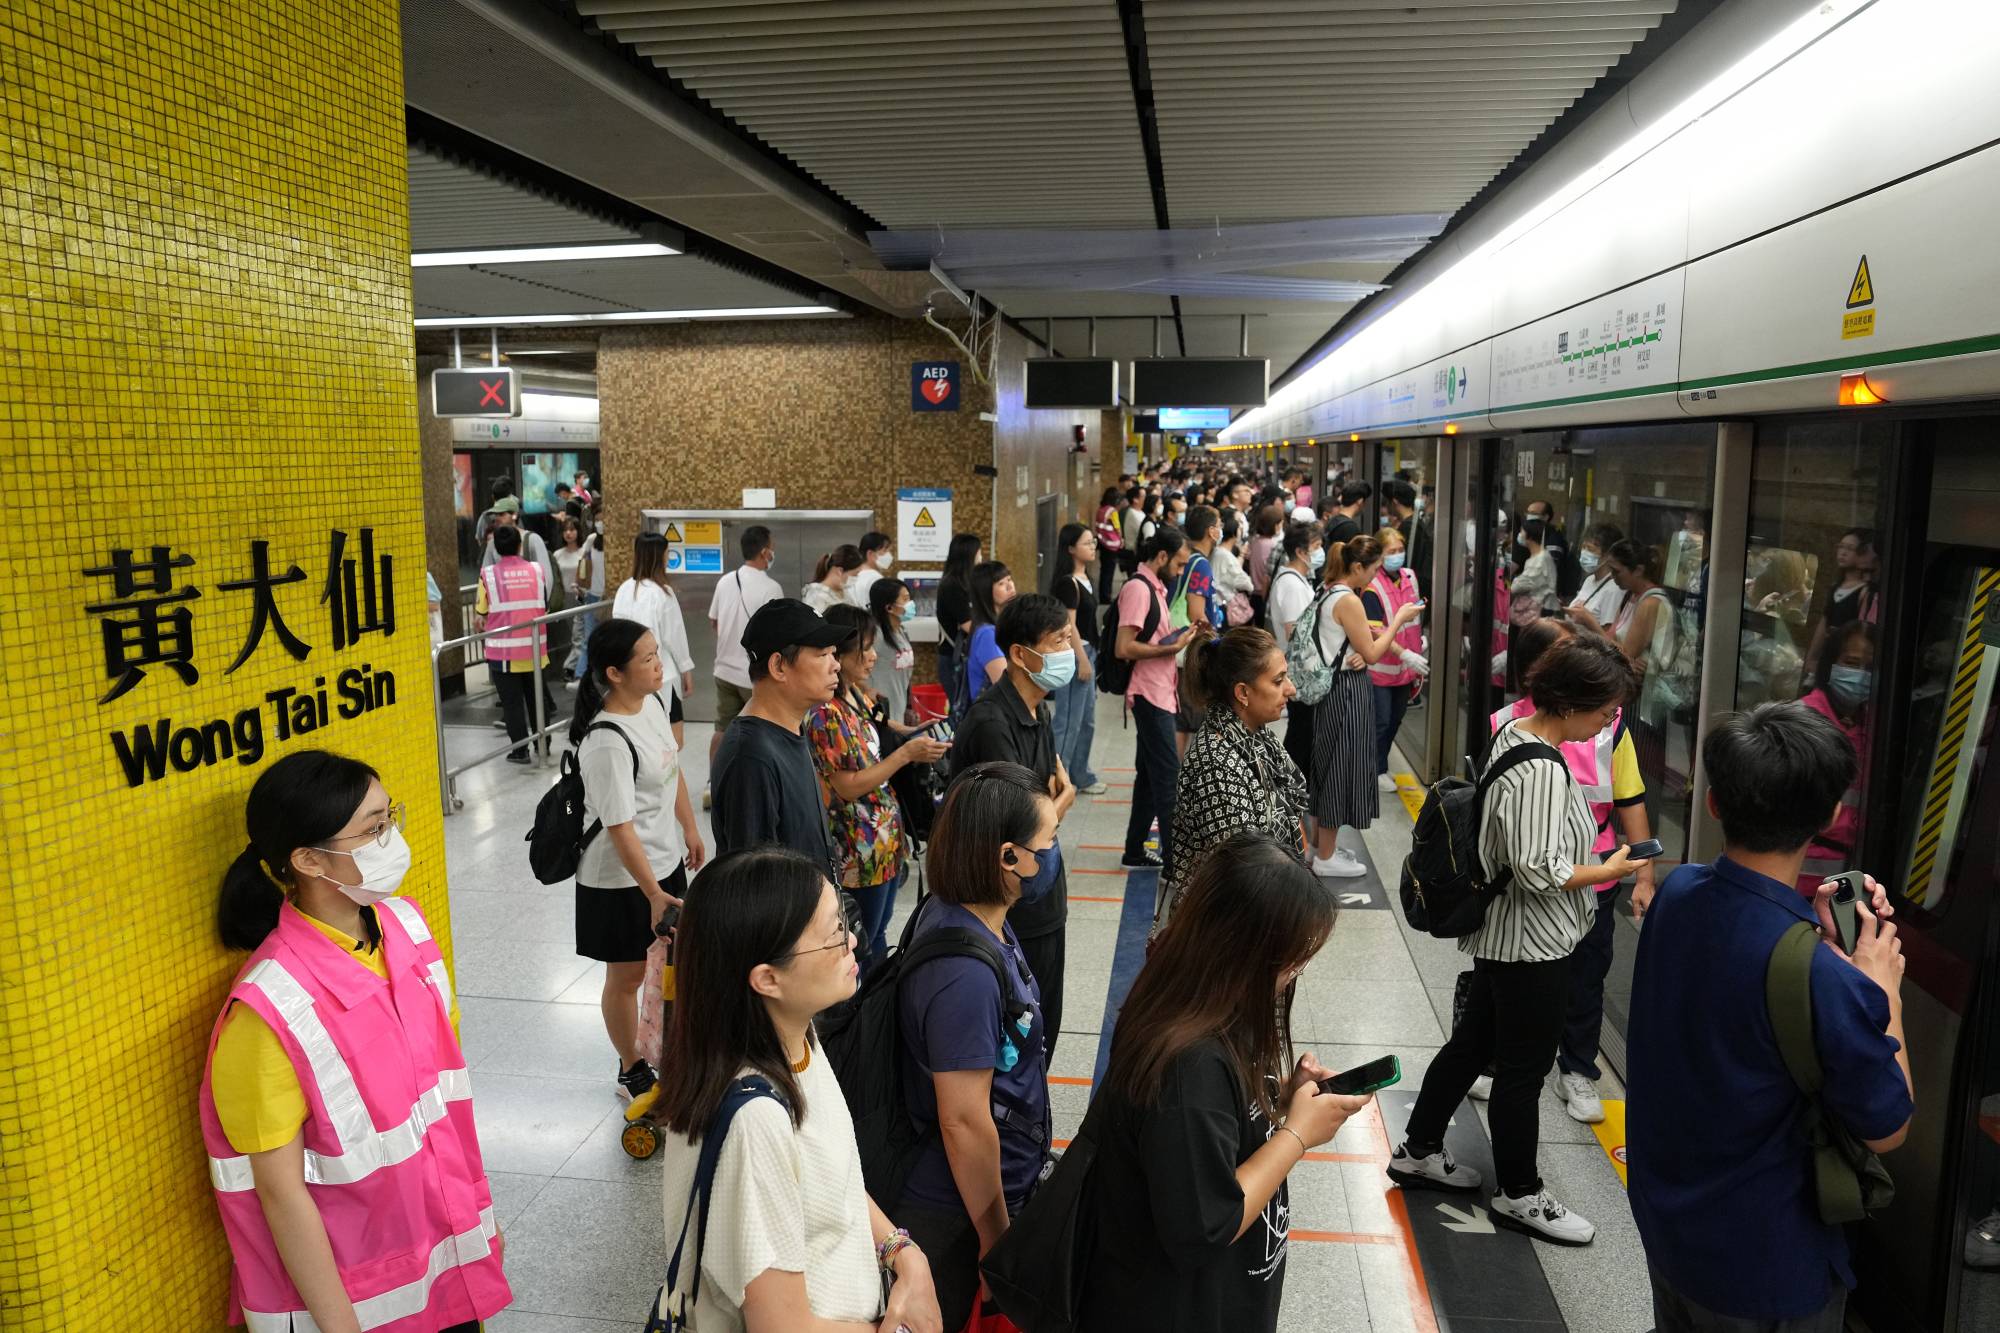 Some passengers say they were caught off guard by the suspension of lift and escalator services to the platform. Photo: Elson Li